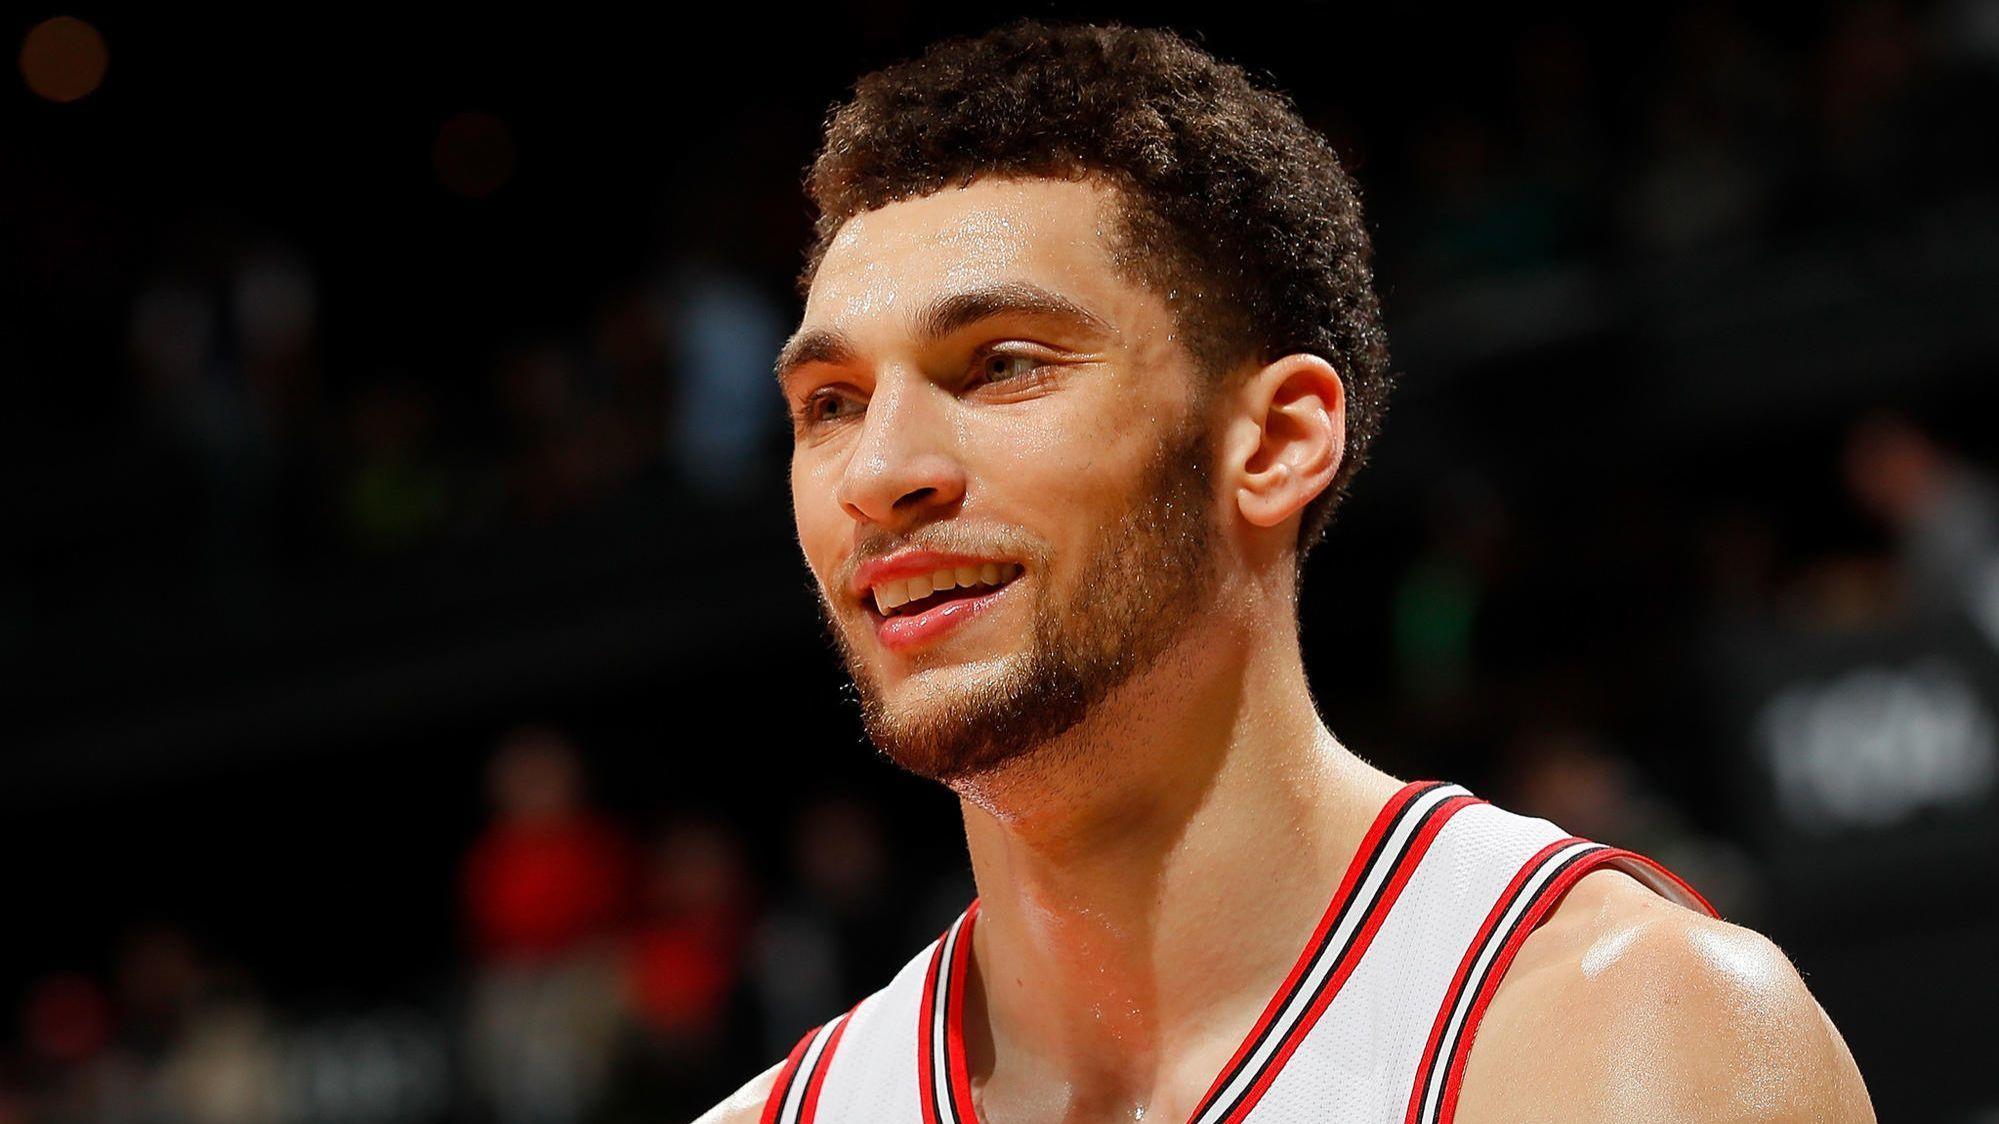 Is Zach LaVine Mixed Race? What is His Ethnicity?